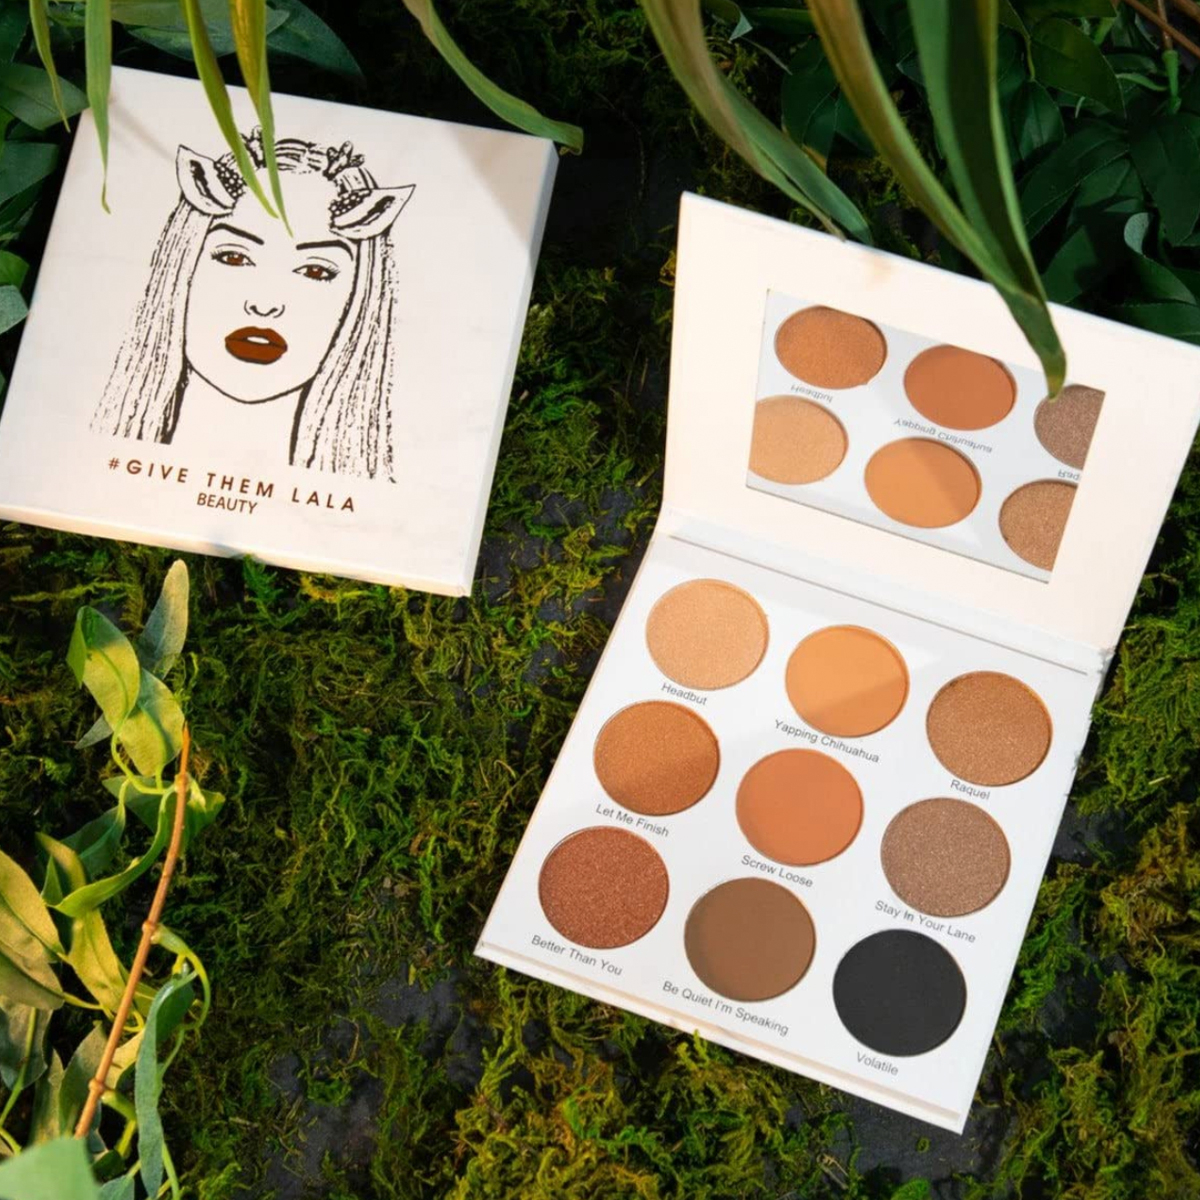 Vanderpump Rules Star Lala Kent Slashes Price on Raquel Leviss Makeup Collab: “EVERYTHING MUST GO” – E! Online